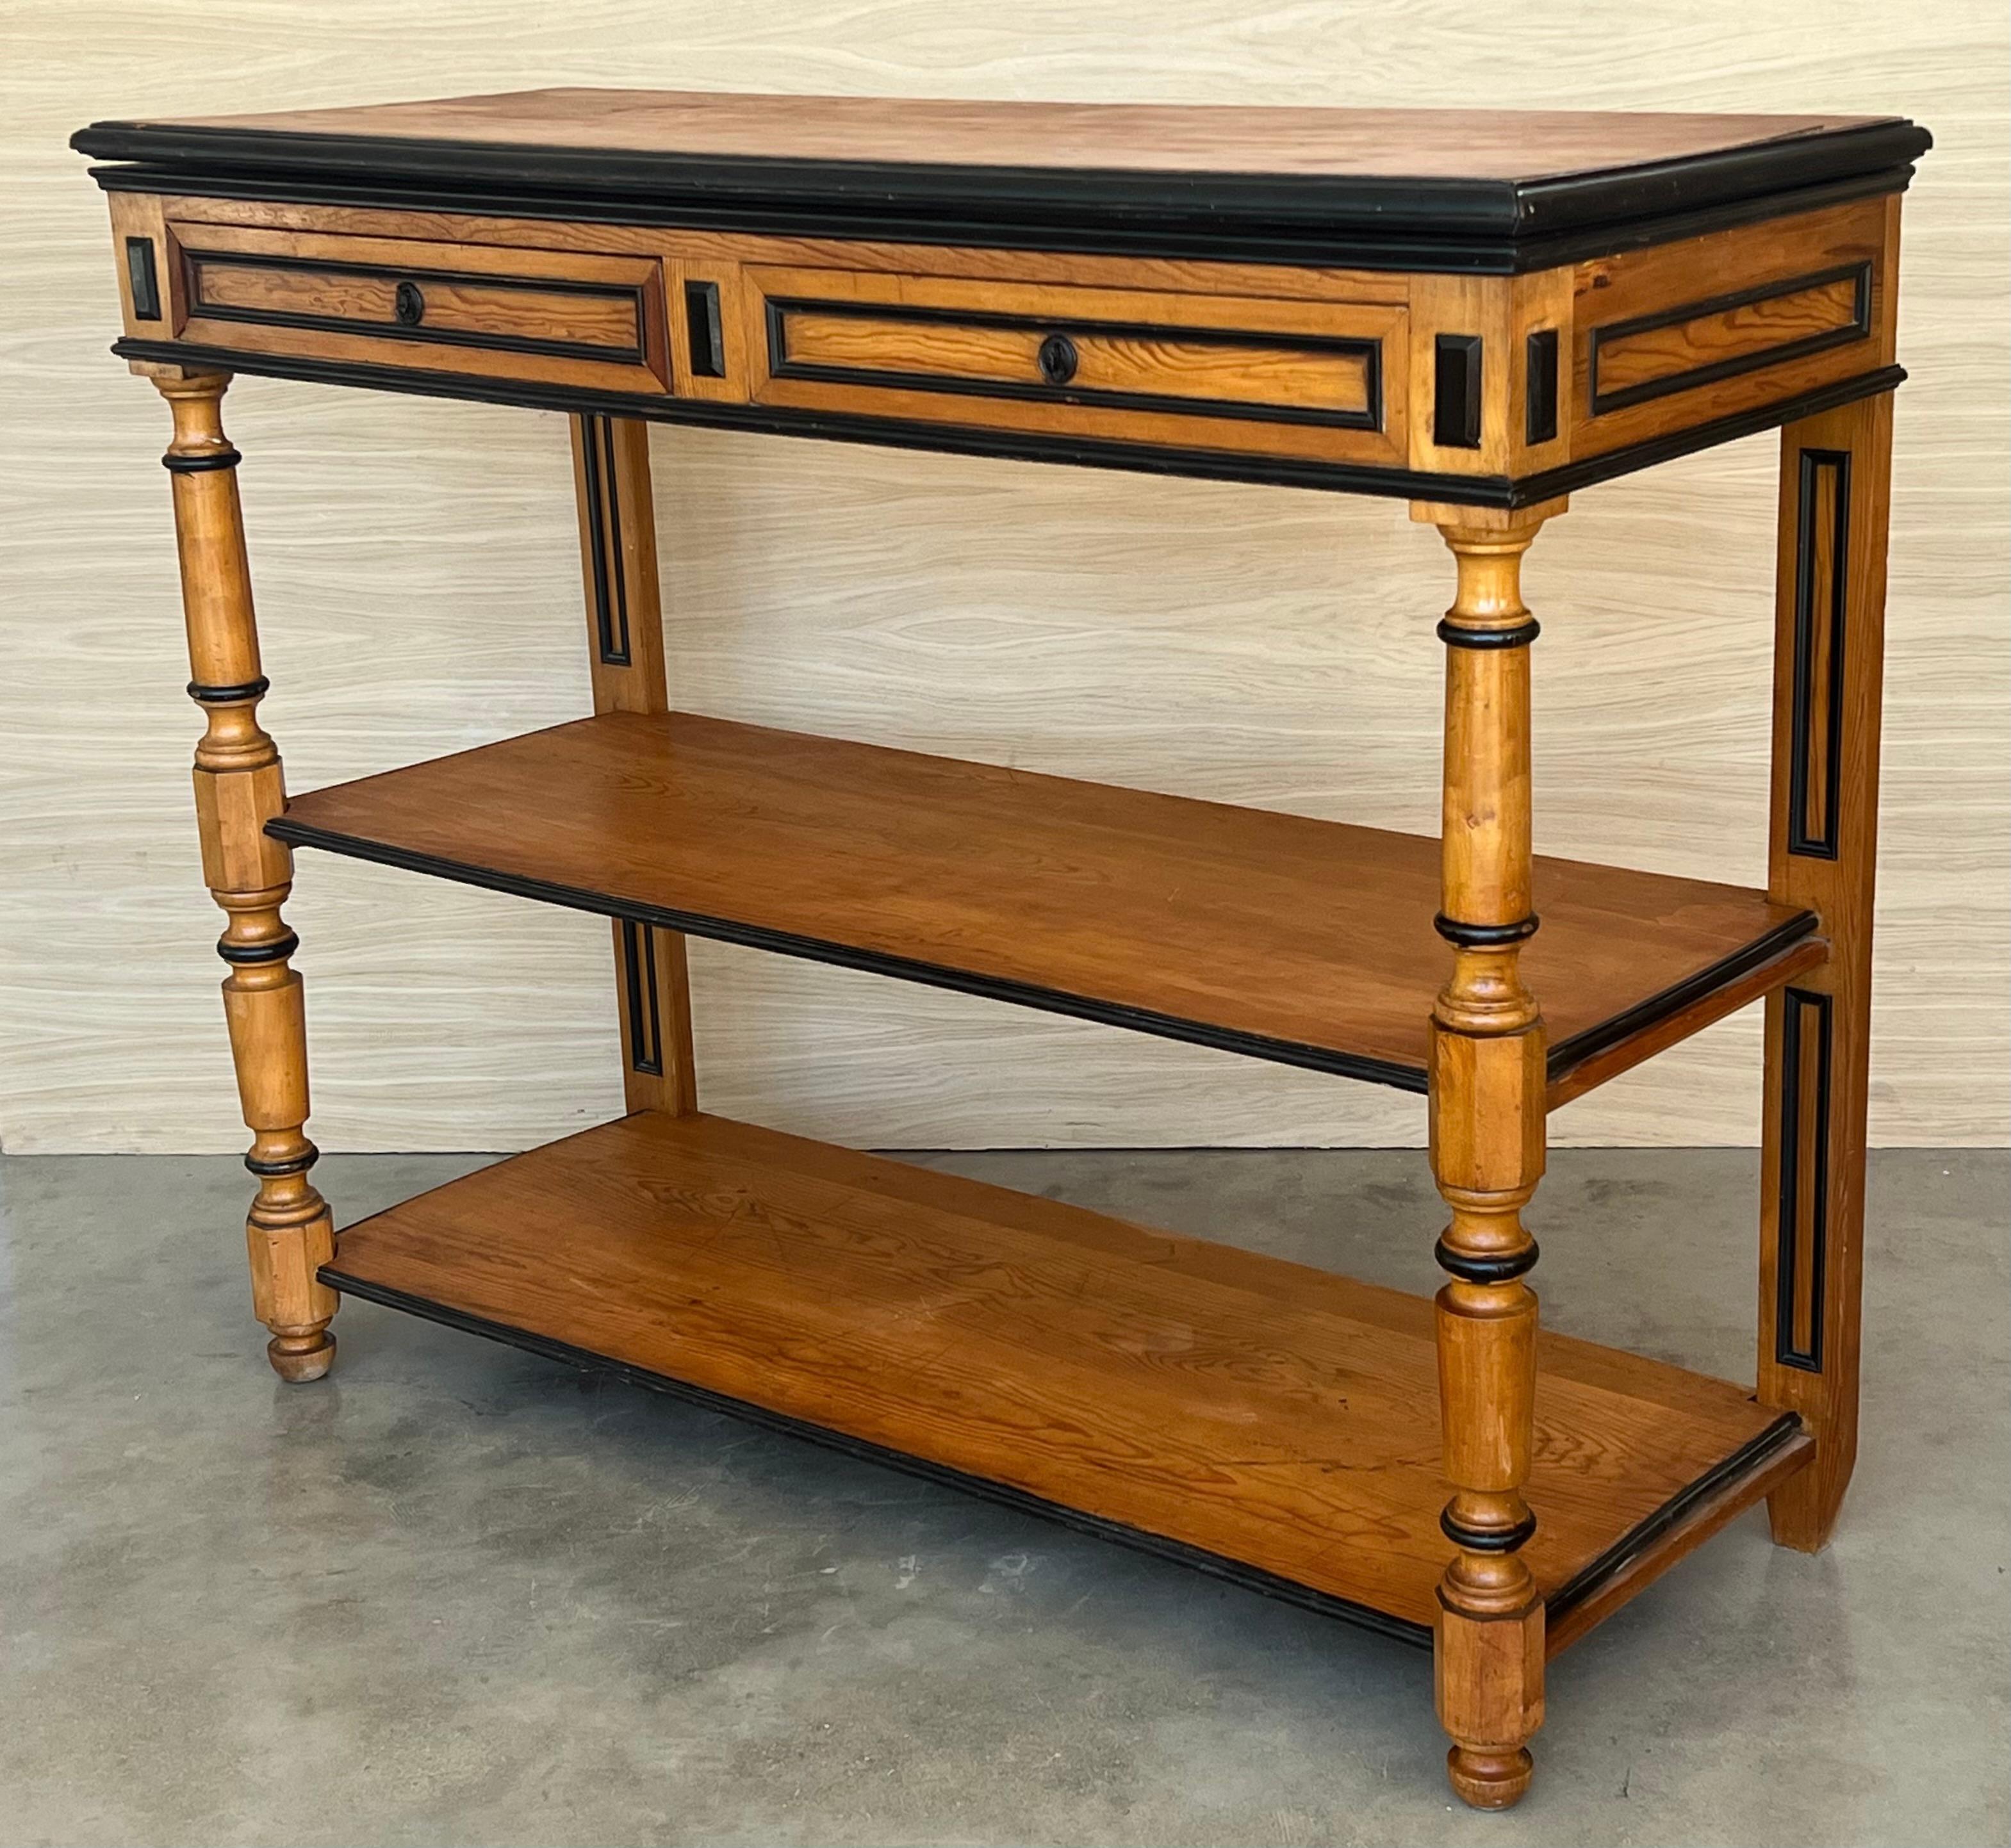 Early 20th C English Lemontree Three Tier Server or Buffet with Drawers For Sale 3